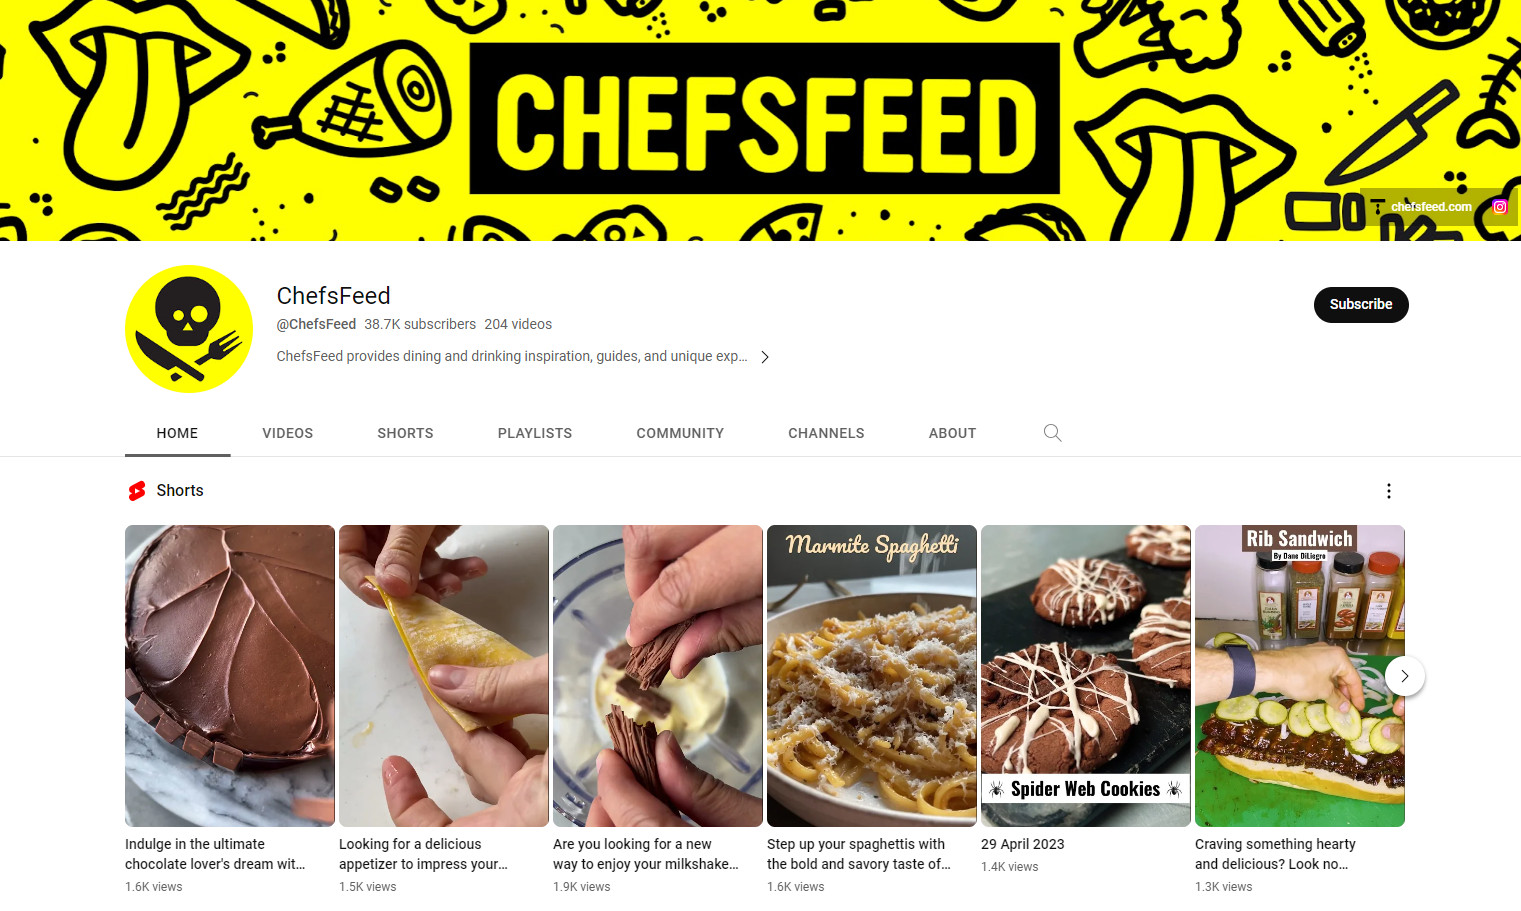 ChefsFeed covers all things restaurant life and home cooking